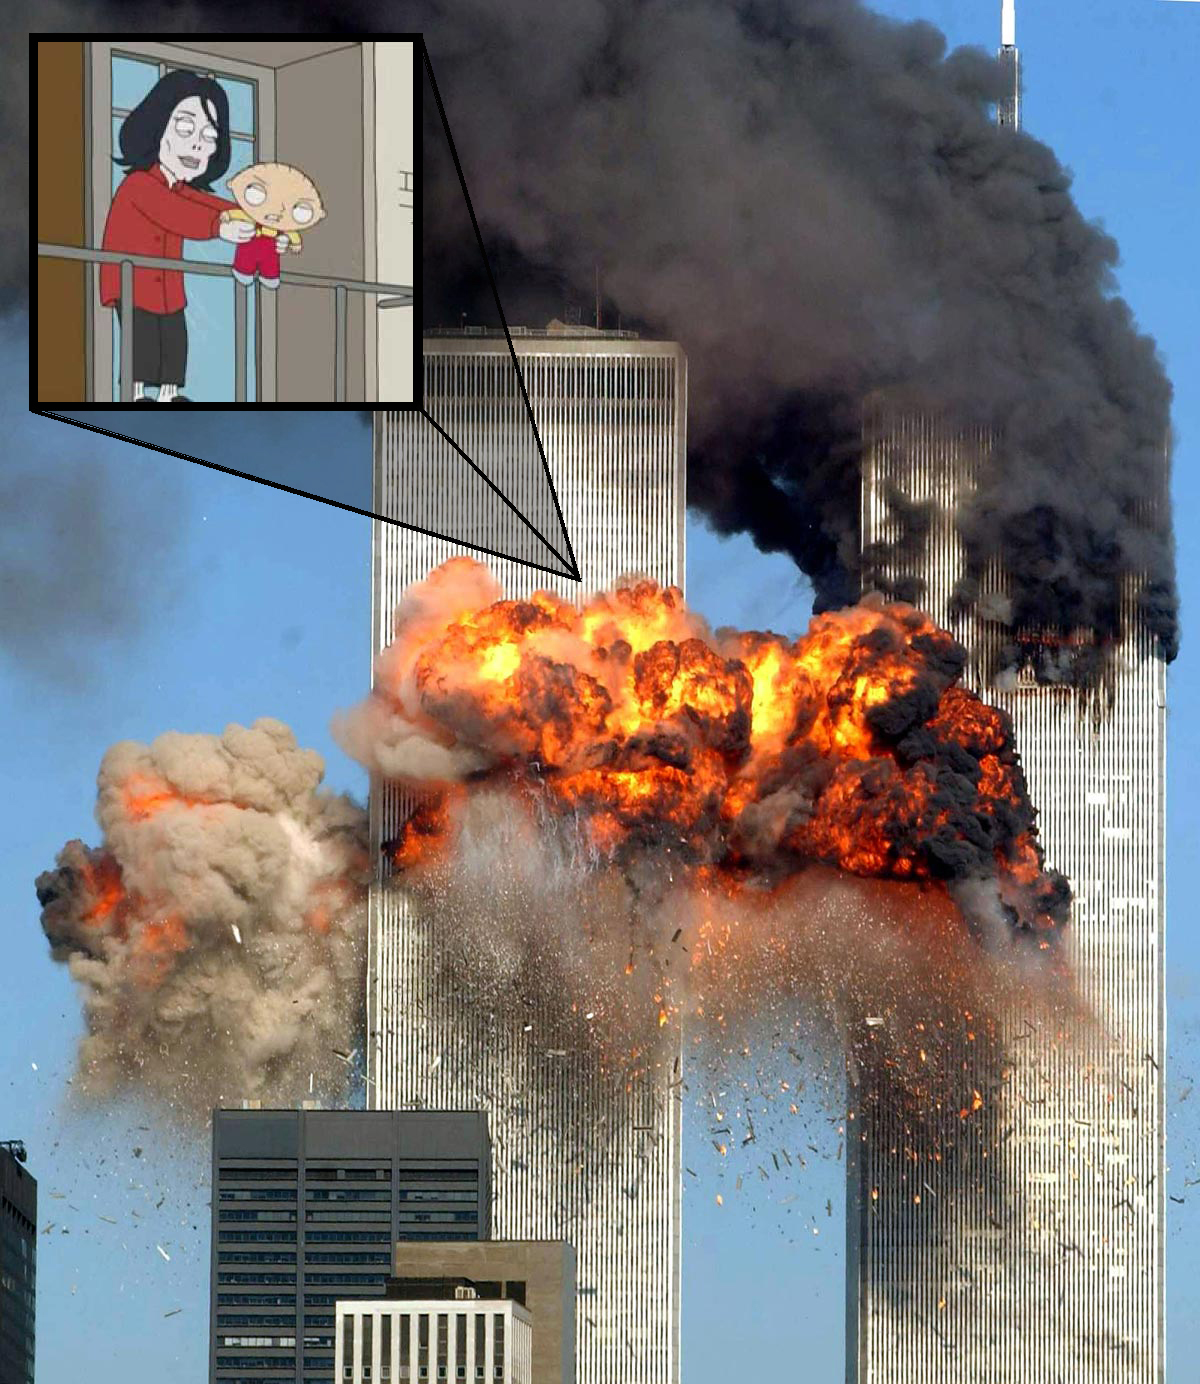 Family Guy creator Seth MacFarlane, and King of pop Michael Jackson were both supposed to be on one of Twin Towers on September 11, 2001.